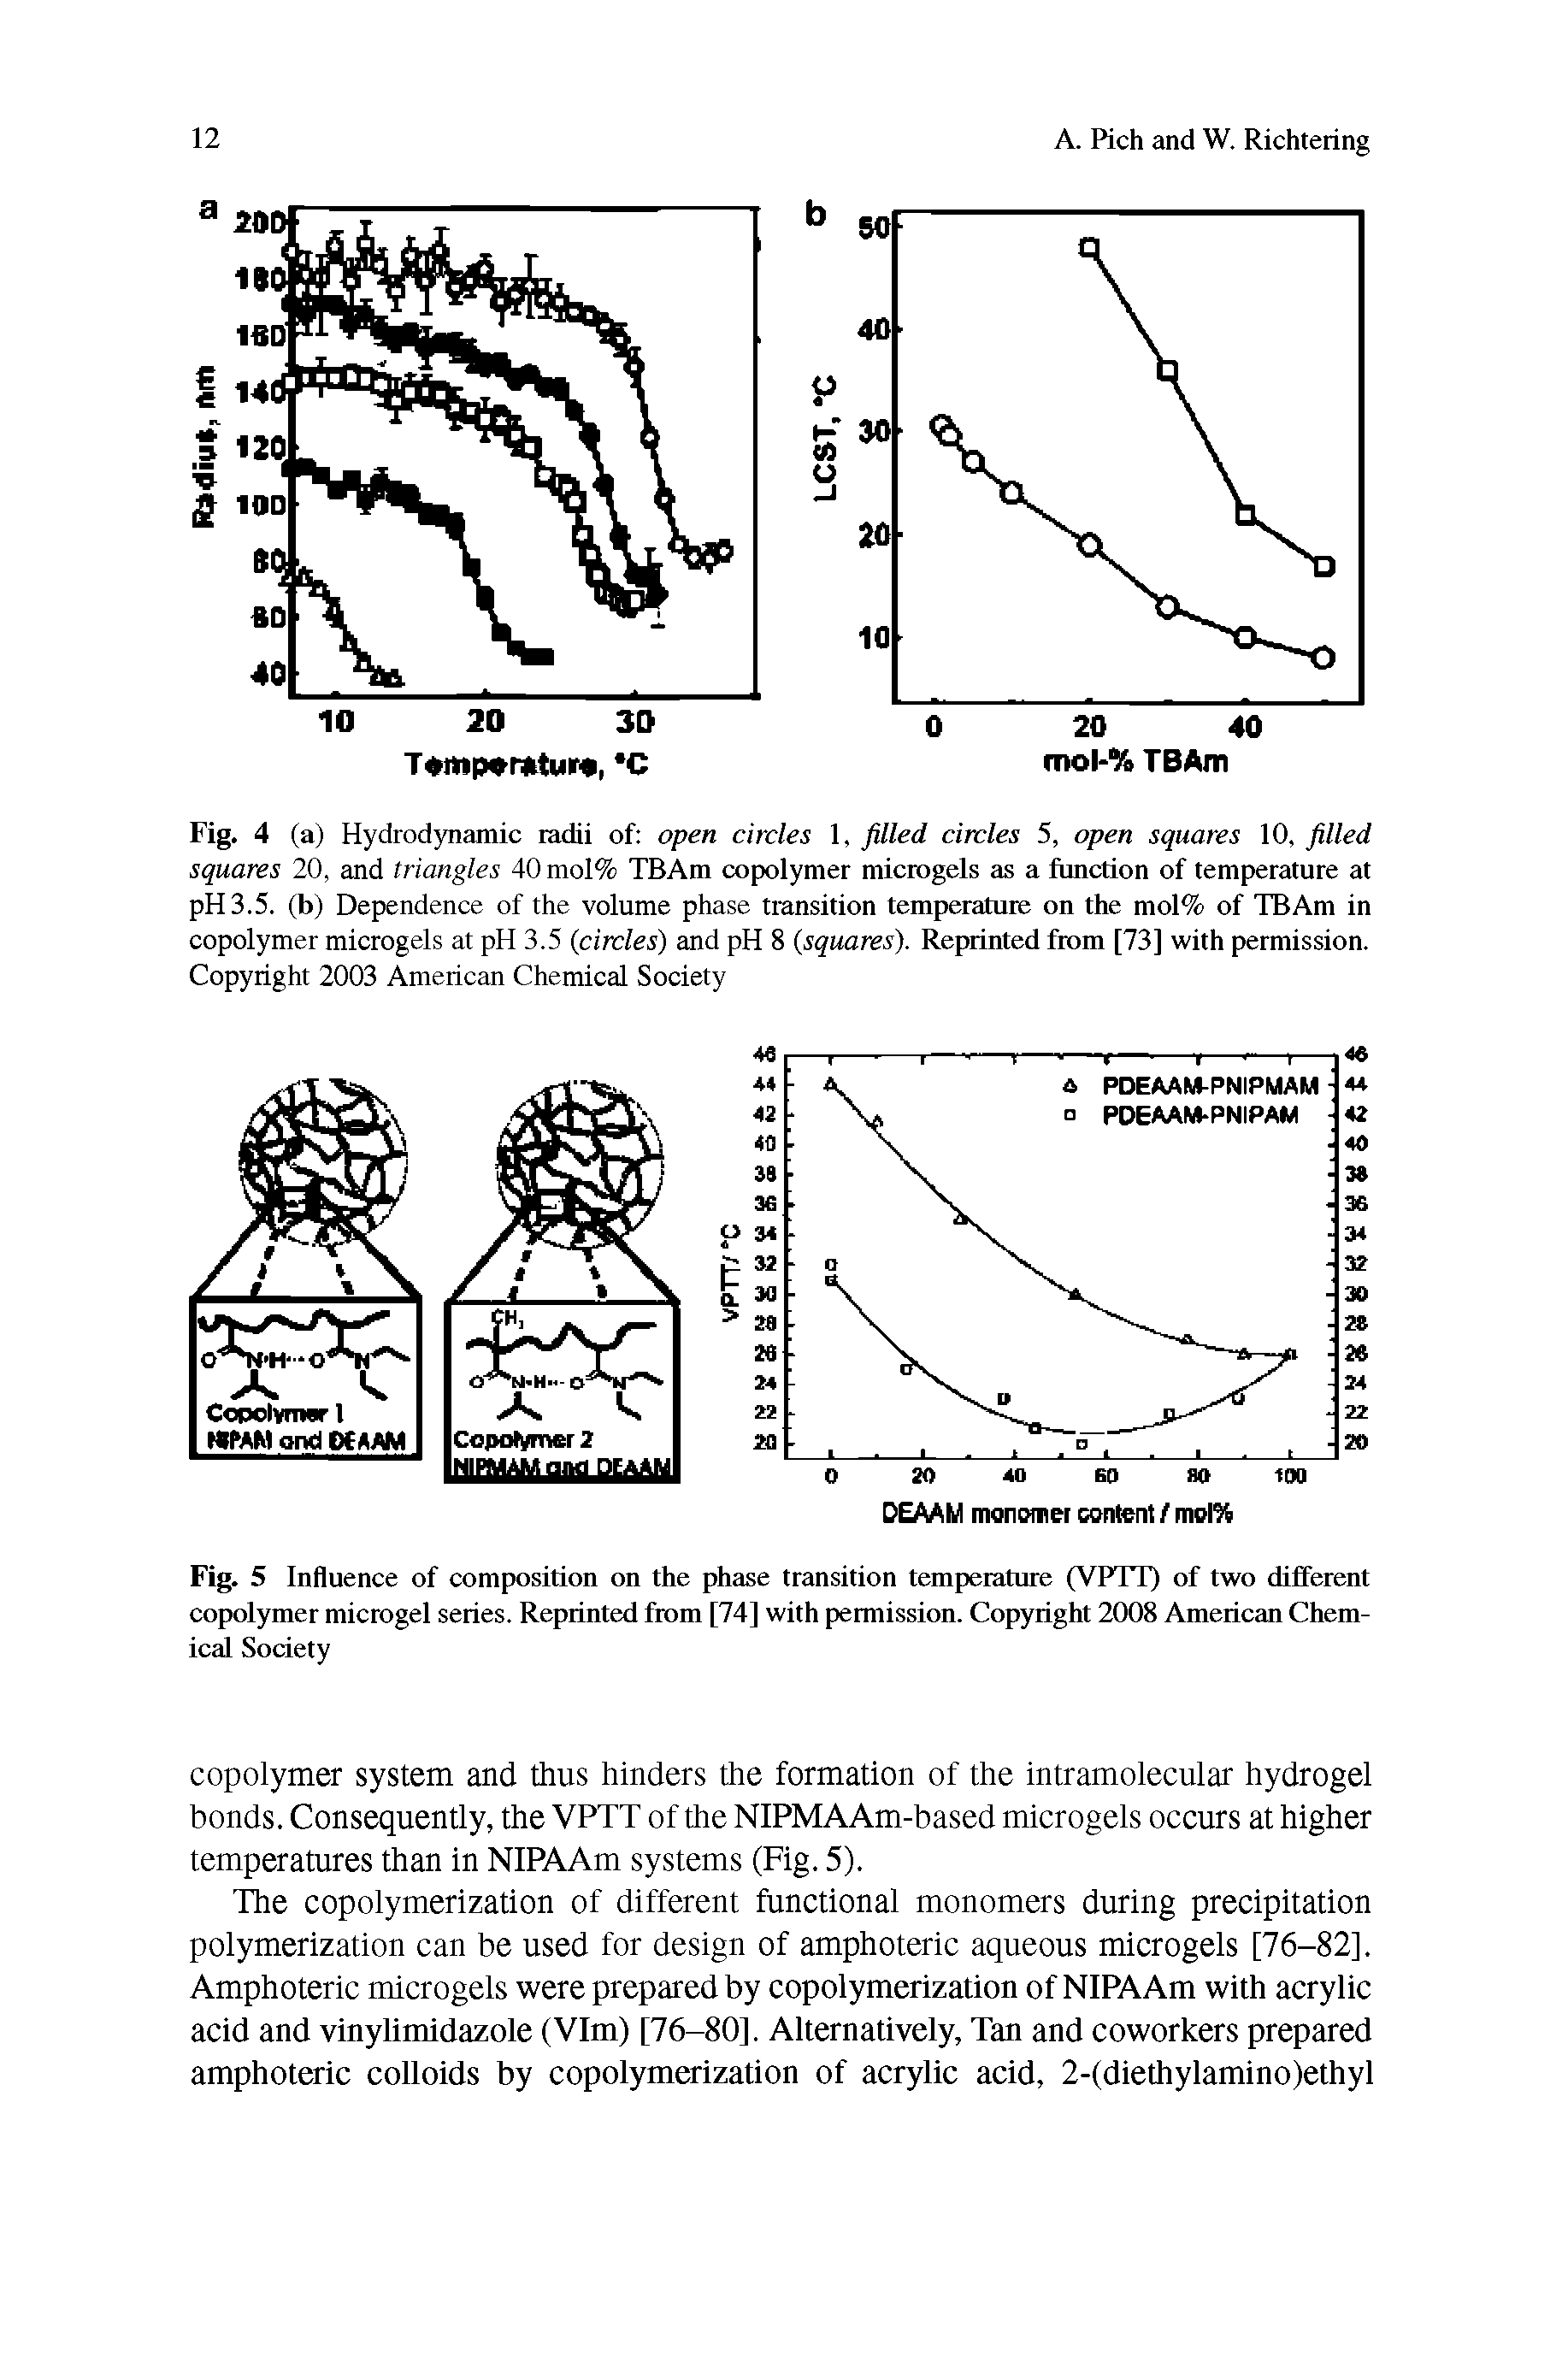 Fig. 5 Influence of composition on the phase transition temperature (VPTT) of two different copolymer microgel series. Reprinted from [74] with permission. Copyright 2008 American Chemical Society...